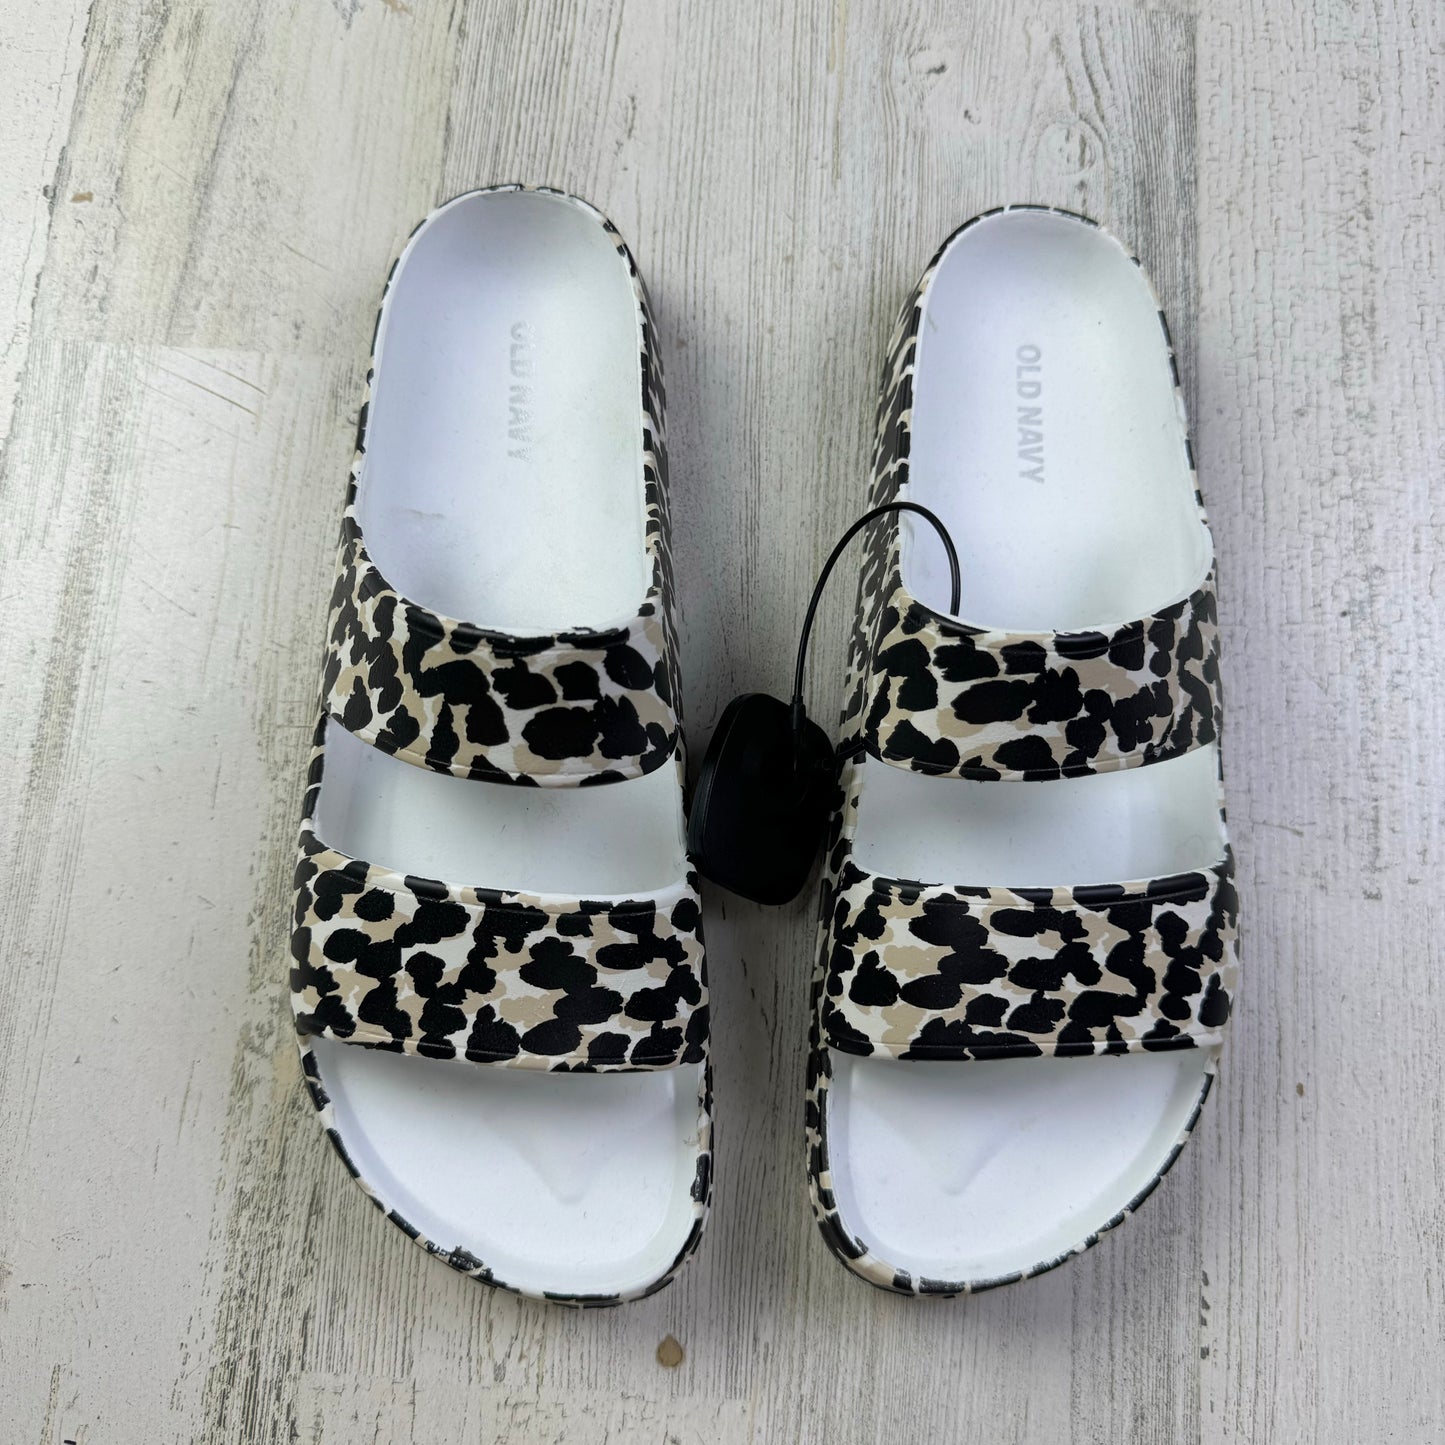 Animal Print Sandals Flats Old Navy, Size 8